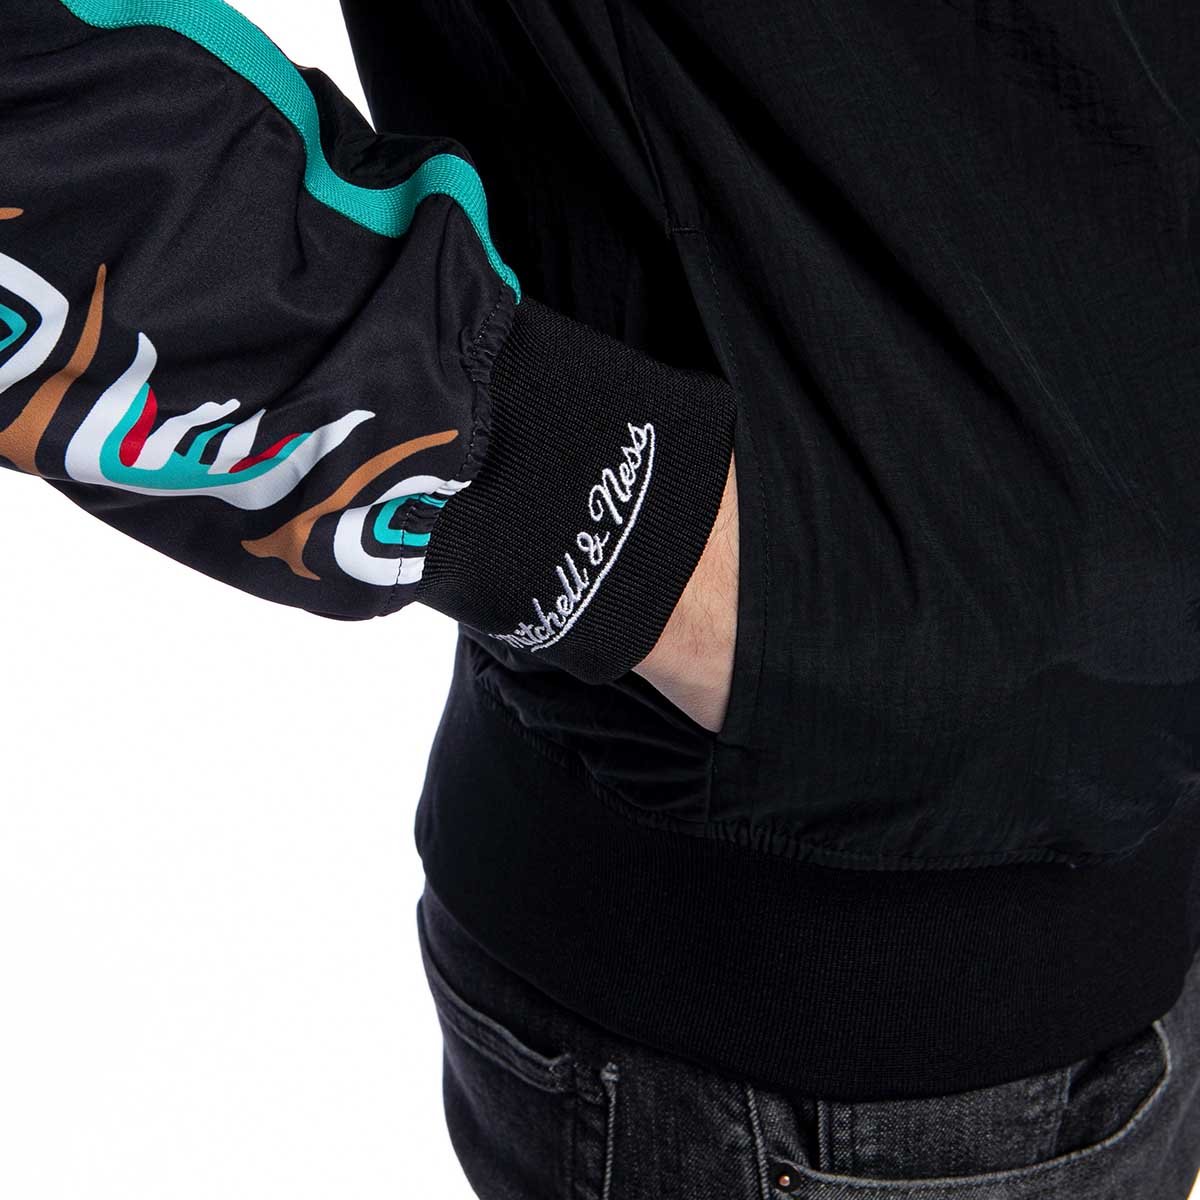 mitchell and ness vancouver grizzlies jacket